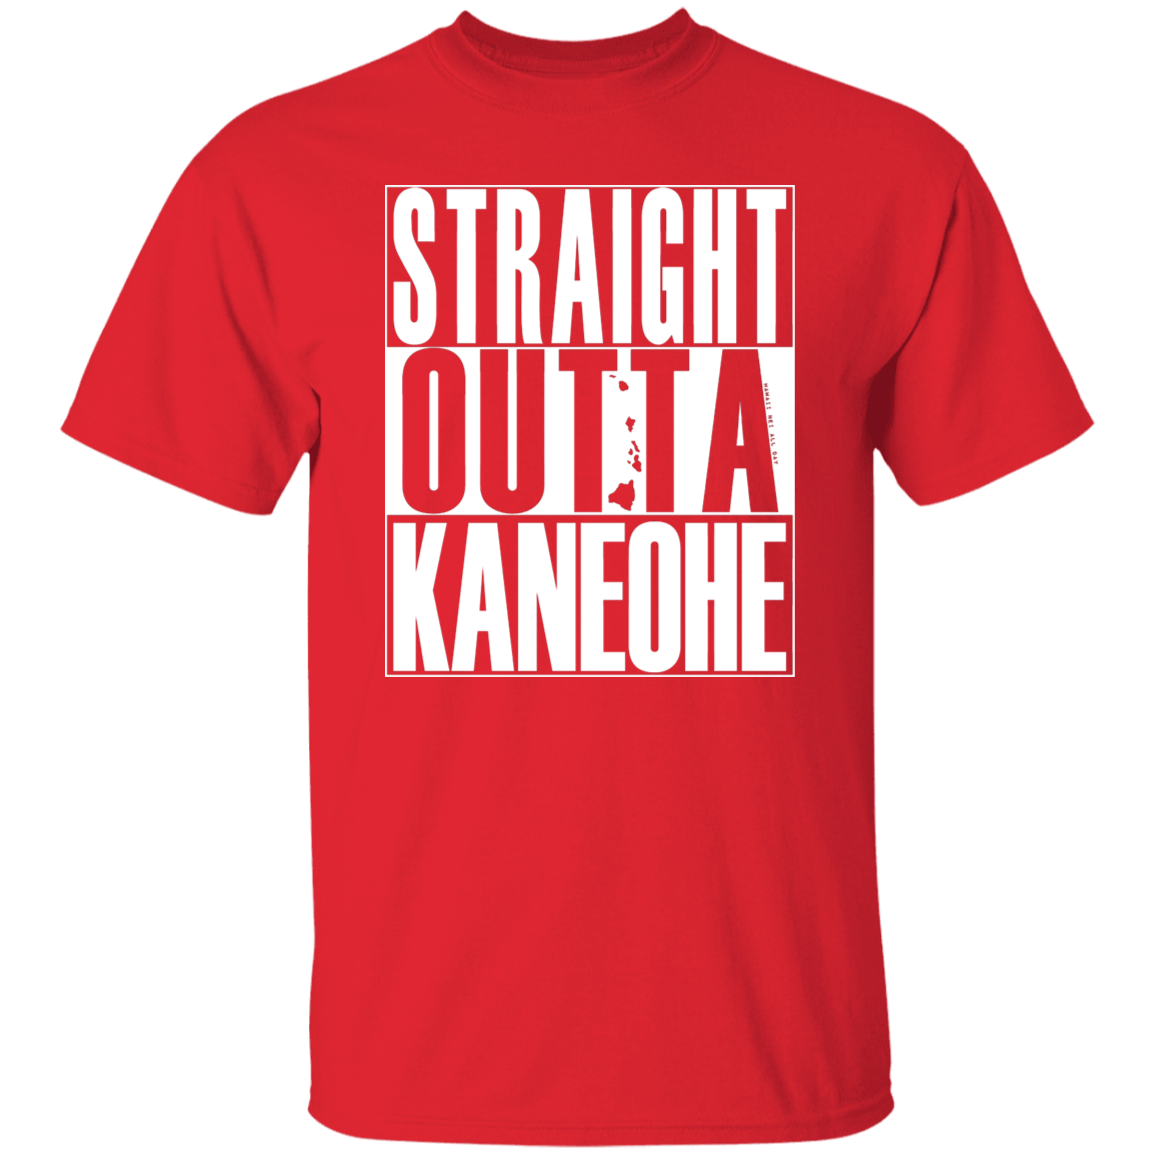 Straight Outta Kaneohe (white ink) T-Shirt